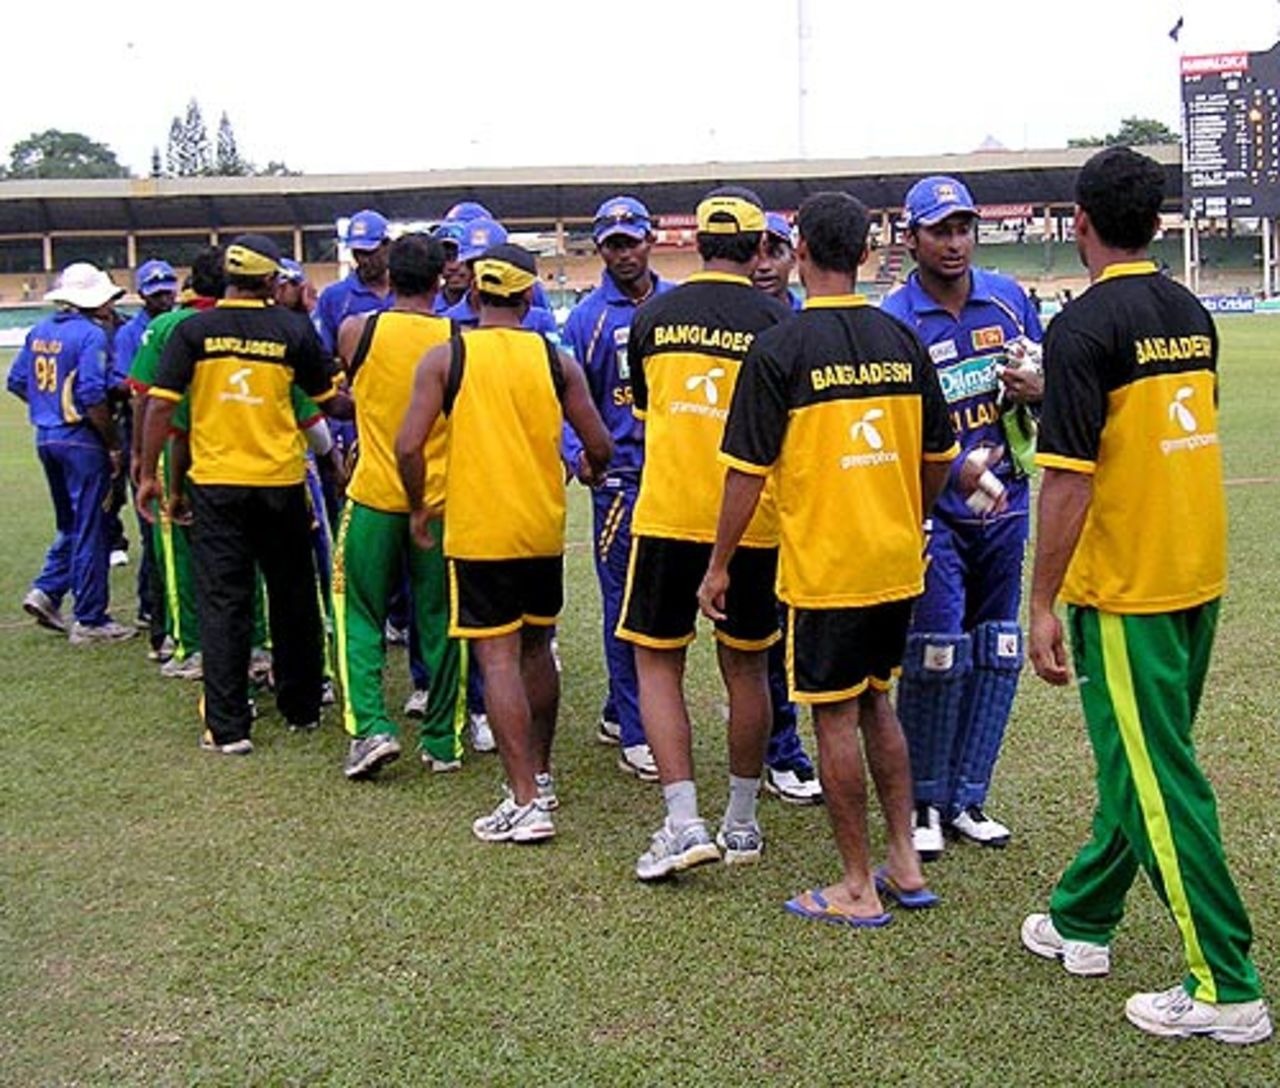 Handshakes all round as Sri Lanka complete a series whitewash over Bangladesh, Colombo, 3rd ODI, July 25, 2007